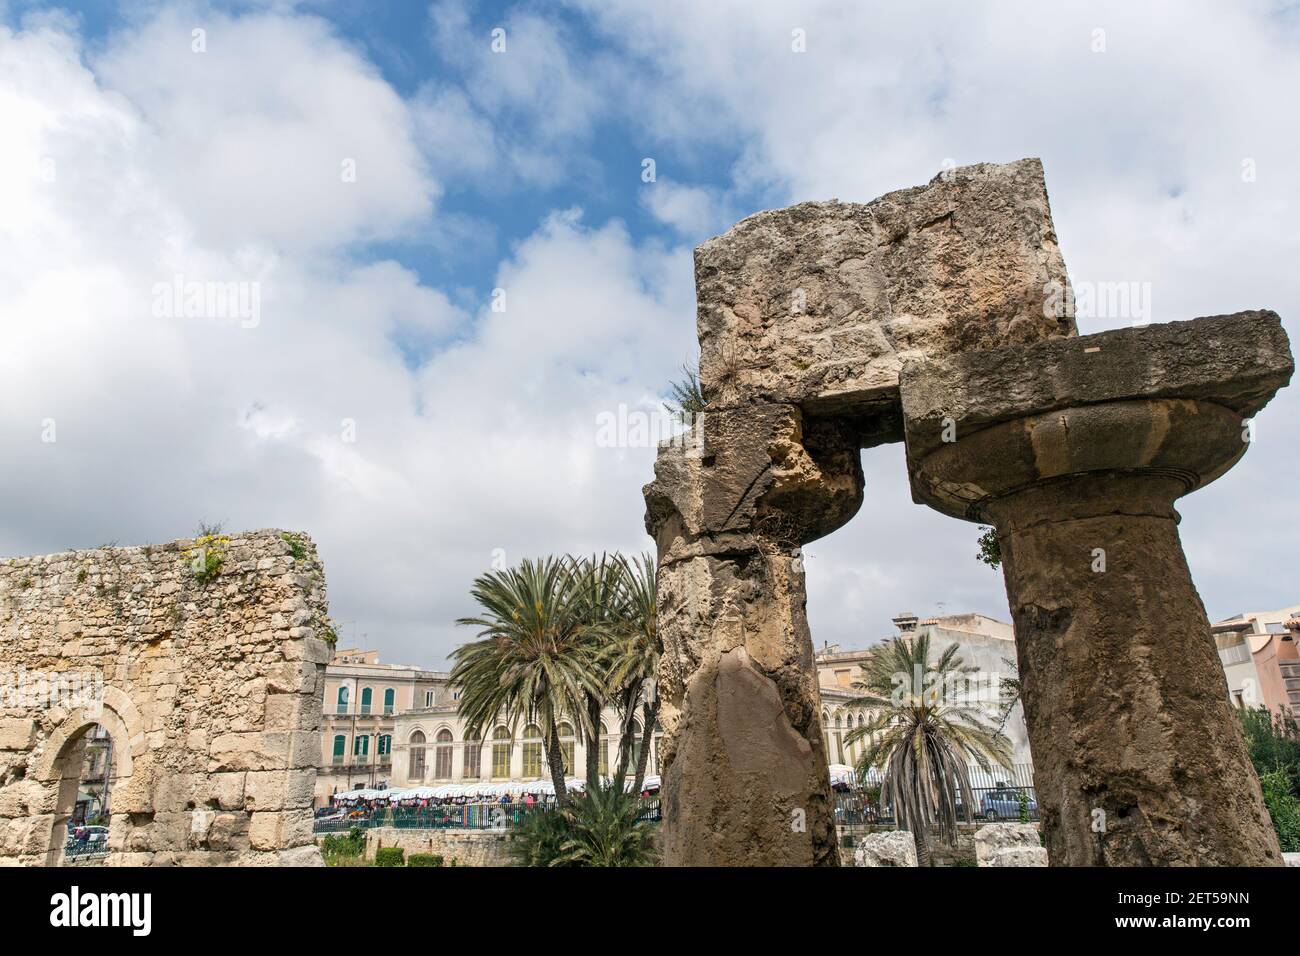 Italy, Sicily, Ortigia, one of the most important ancient Greek monuments on Ortygia, in front of the Piazza Pancali, Stock Photo